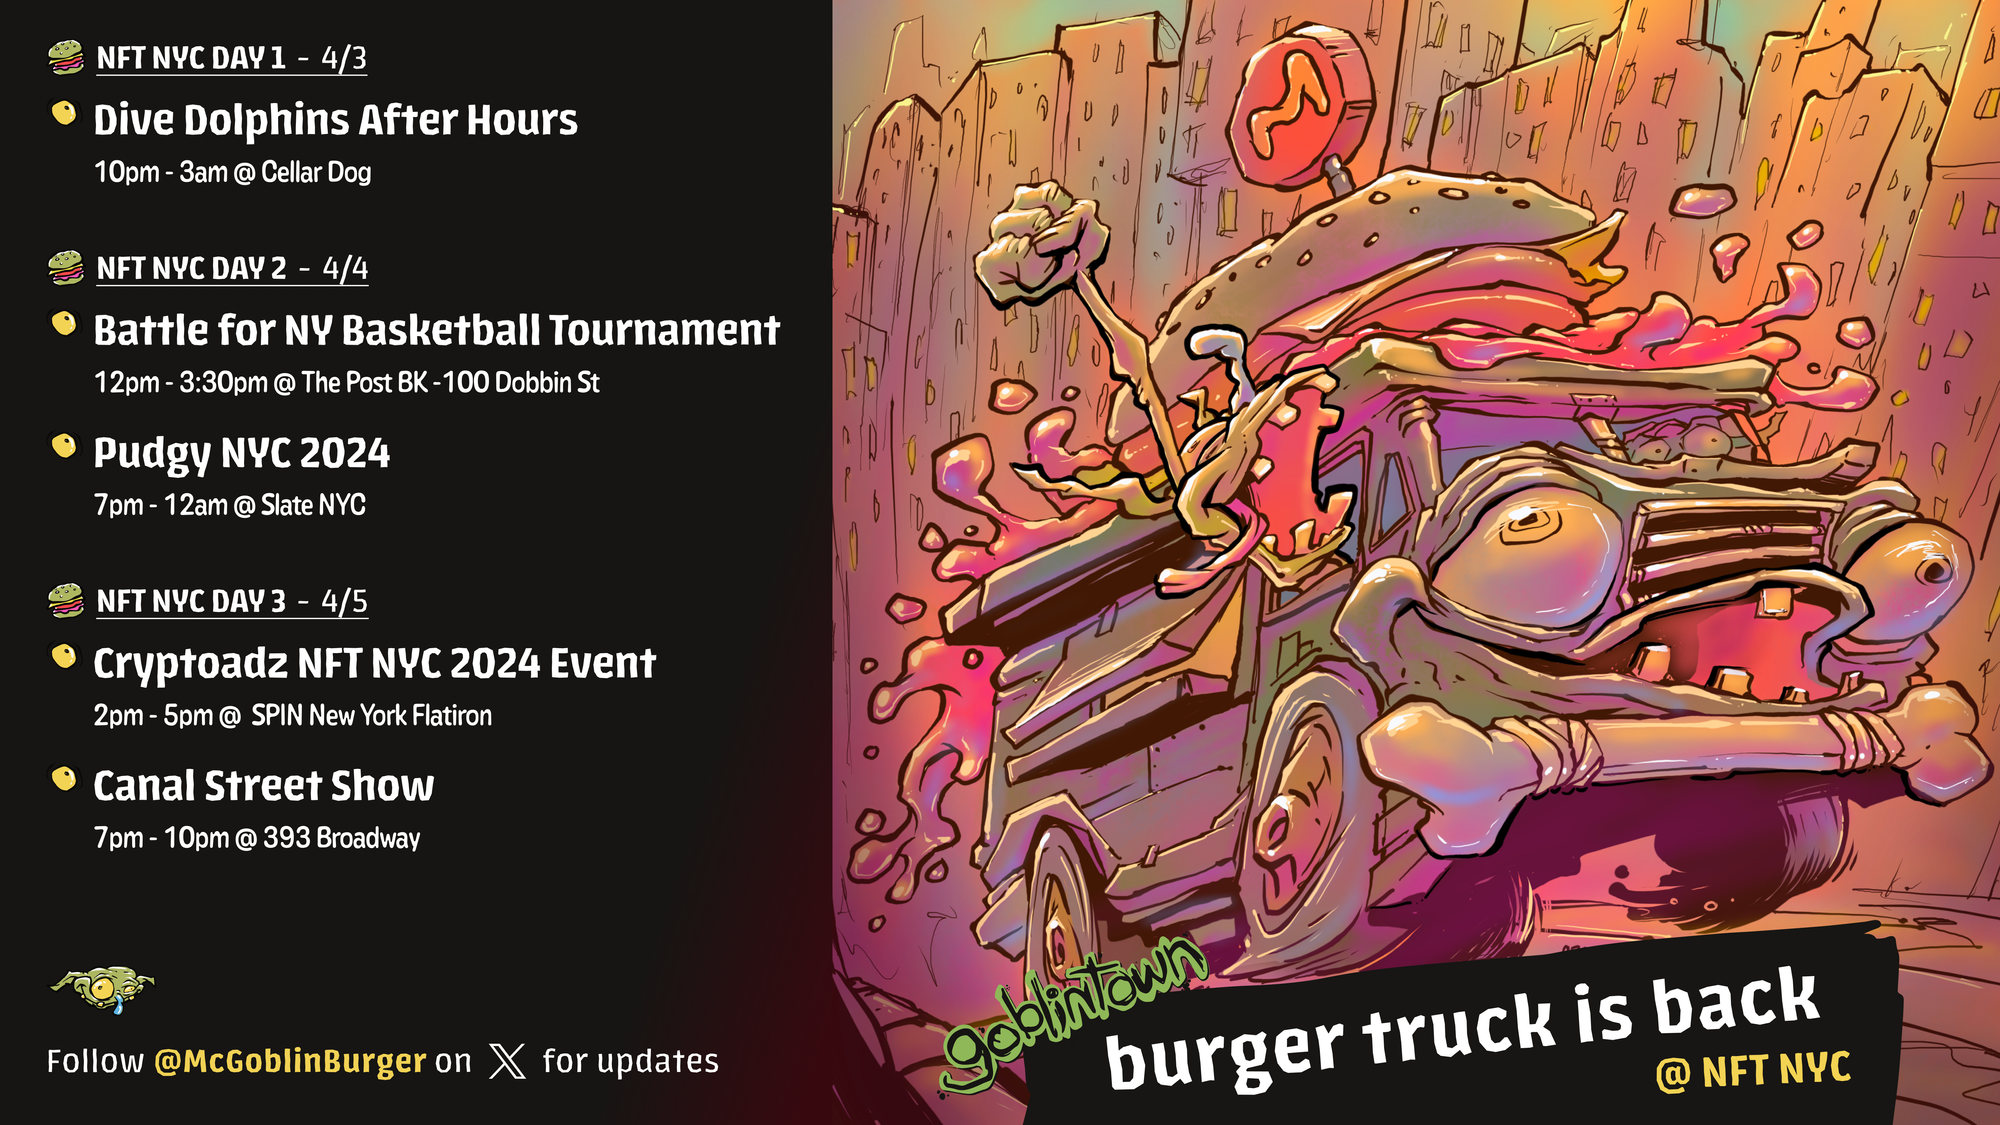 Burgers are Back! TODAY the McGoblinburger Truck Returns